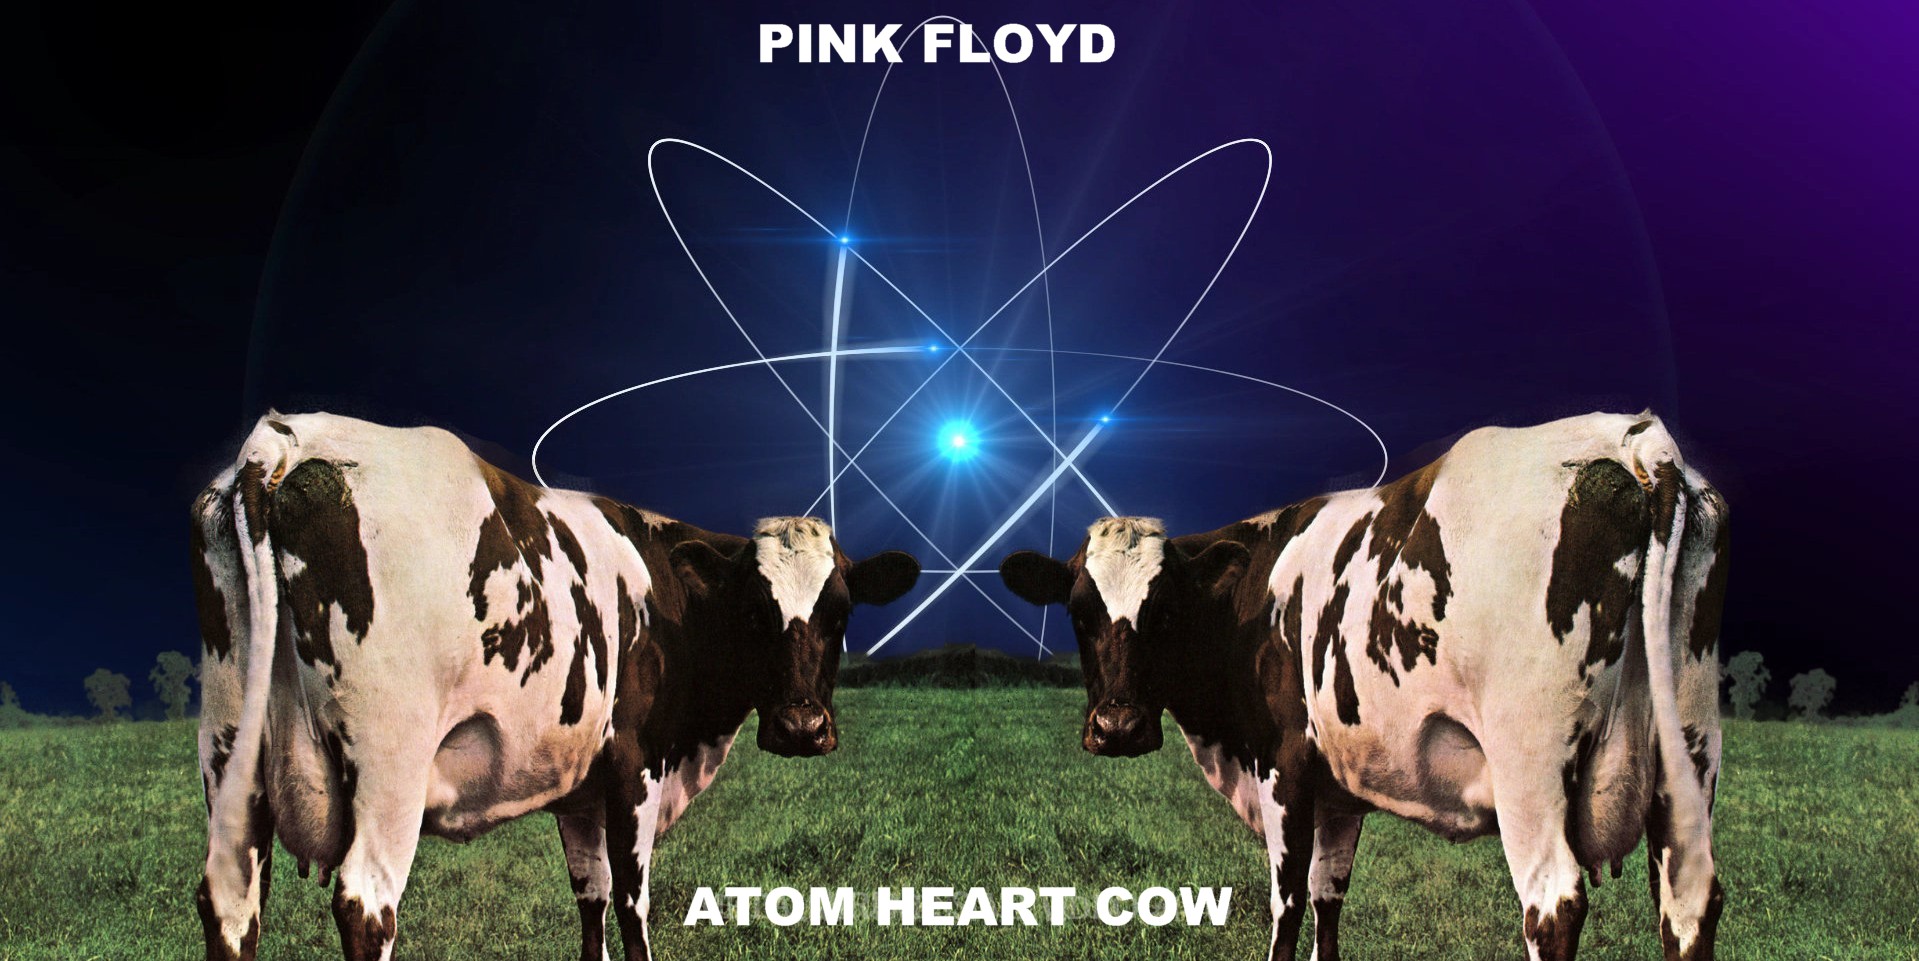 1970-10-23-Atom_Heart_Cow-front